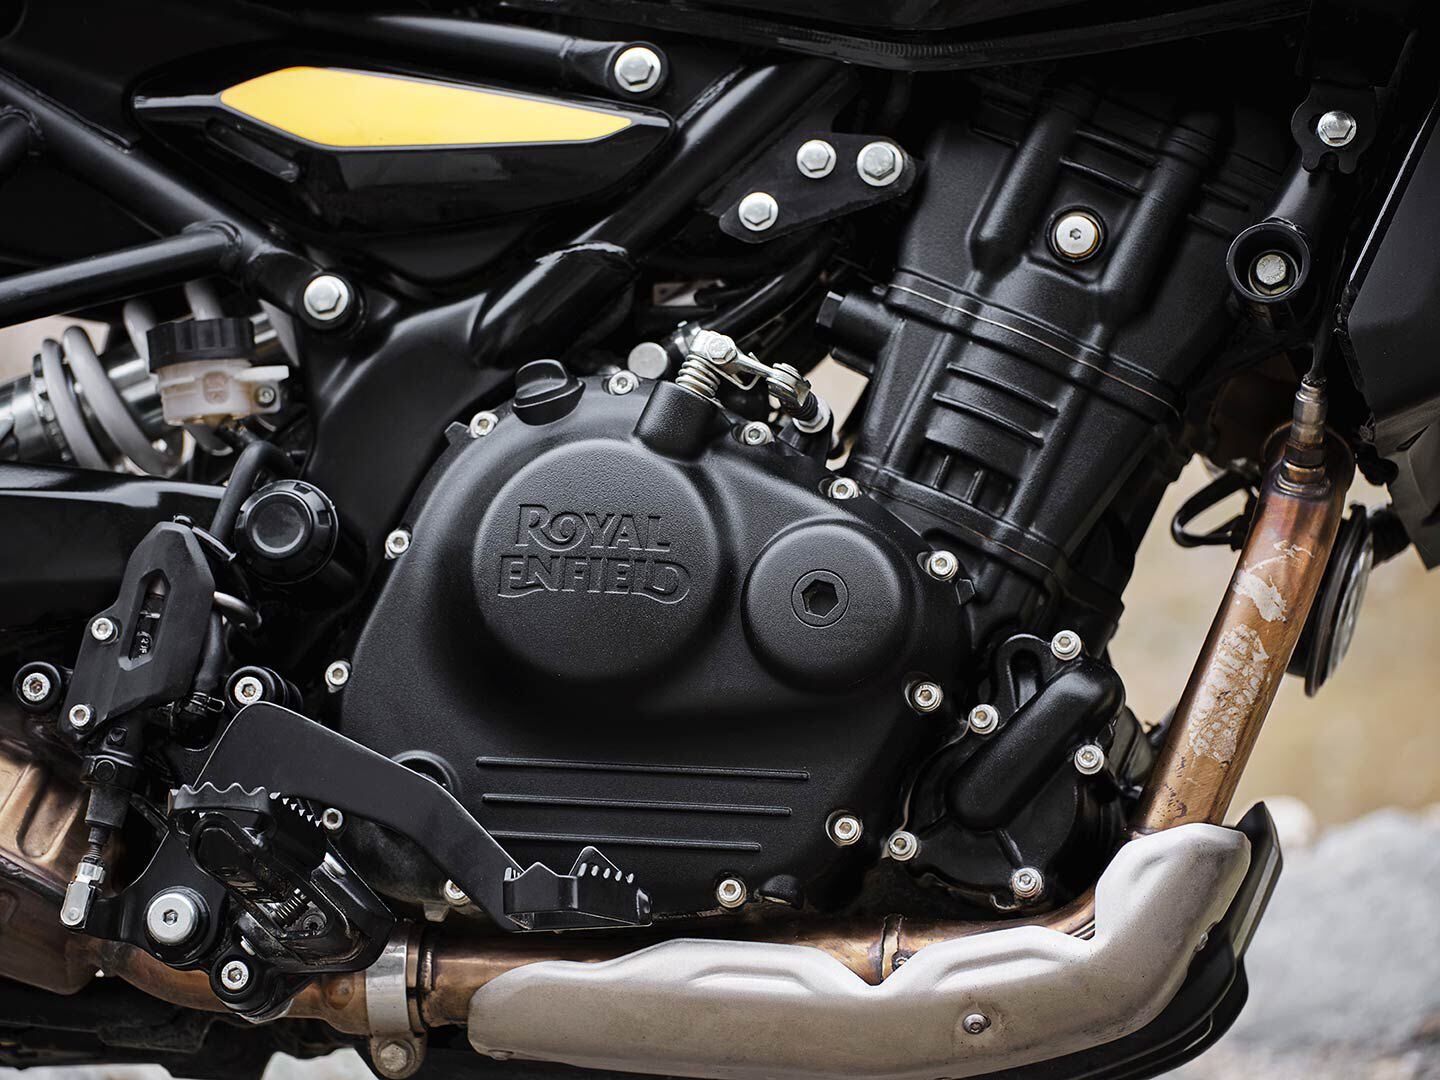 The brand-new 452cc single has four valves and a pair of overhead cams and, most importantly, liquid-cooling.